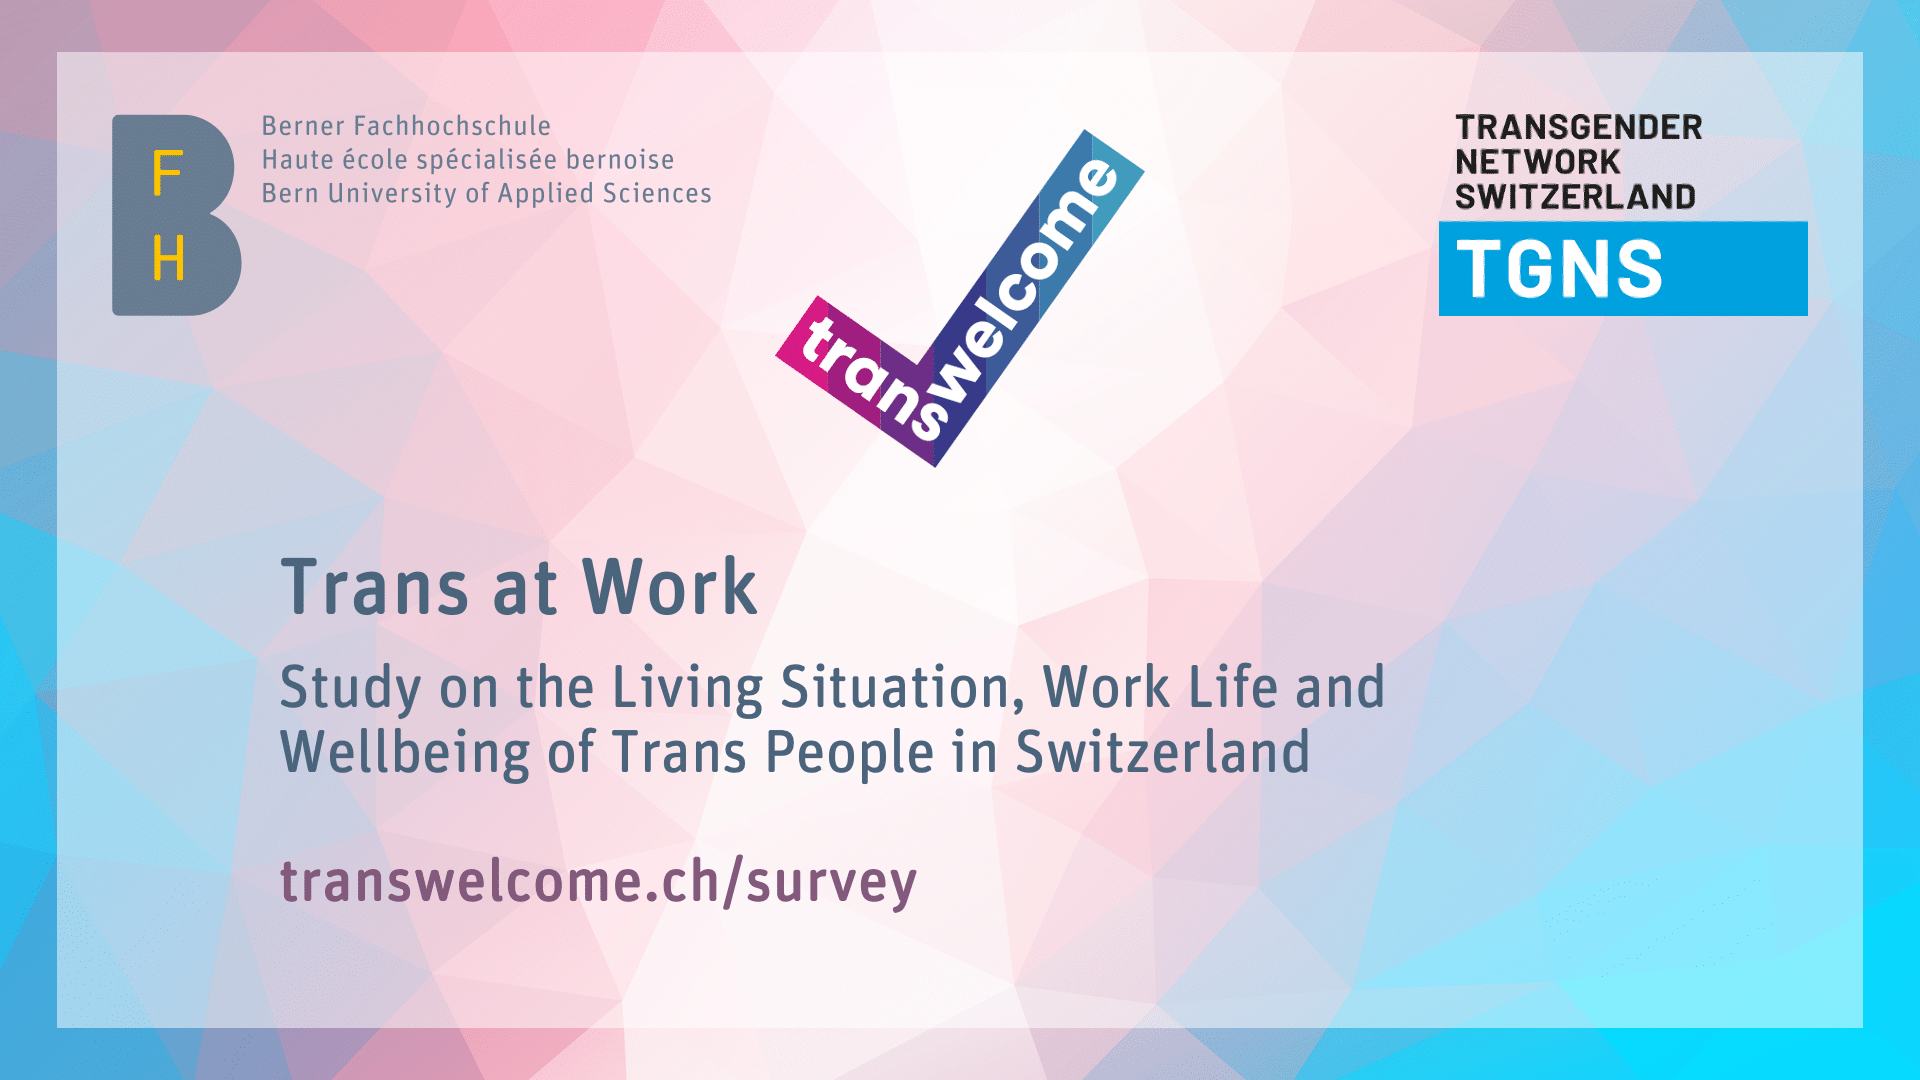 Study on the Living Situation, Work Life and Wellbeing of Trans People in Switzerland